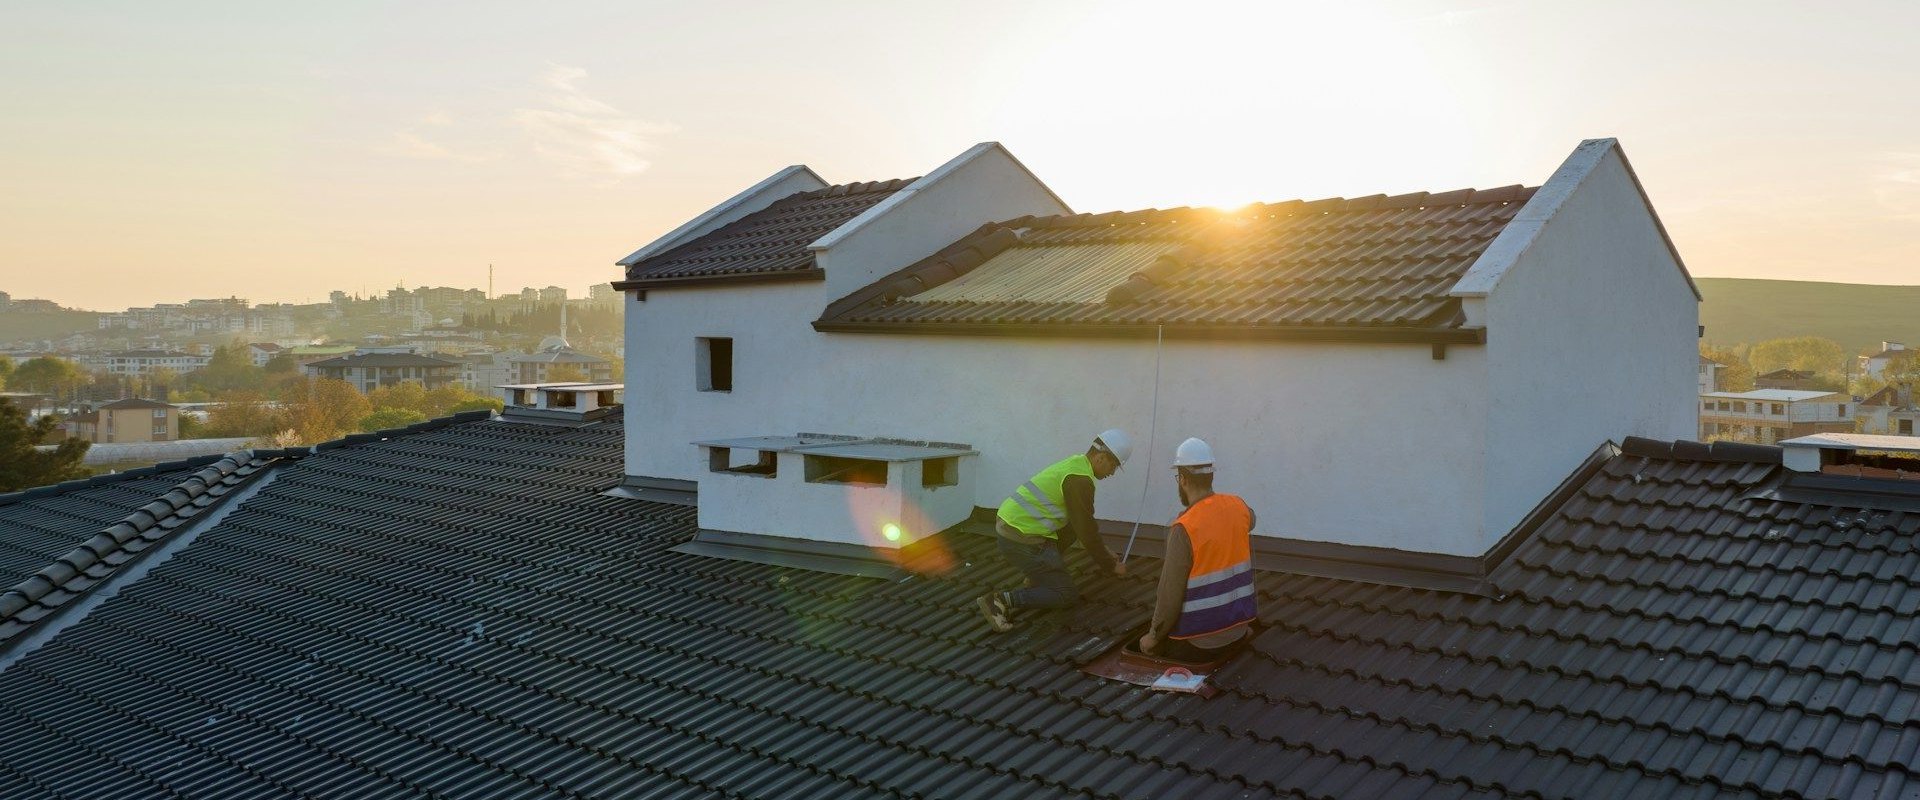 Licensing and Insurance Requirements for Roofing Contractors